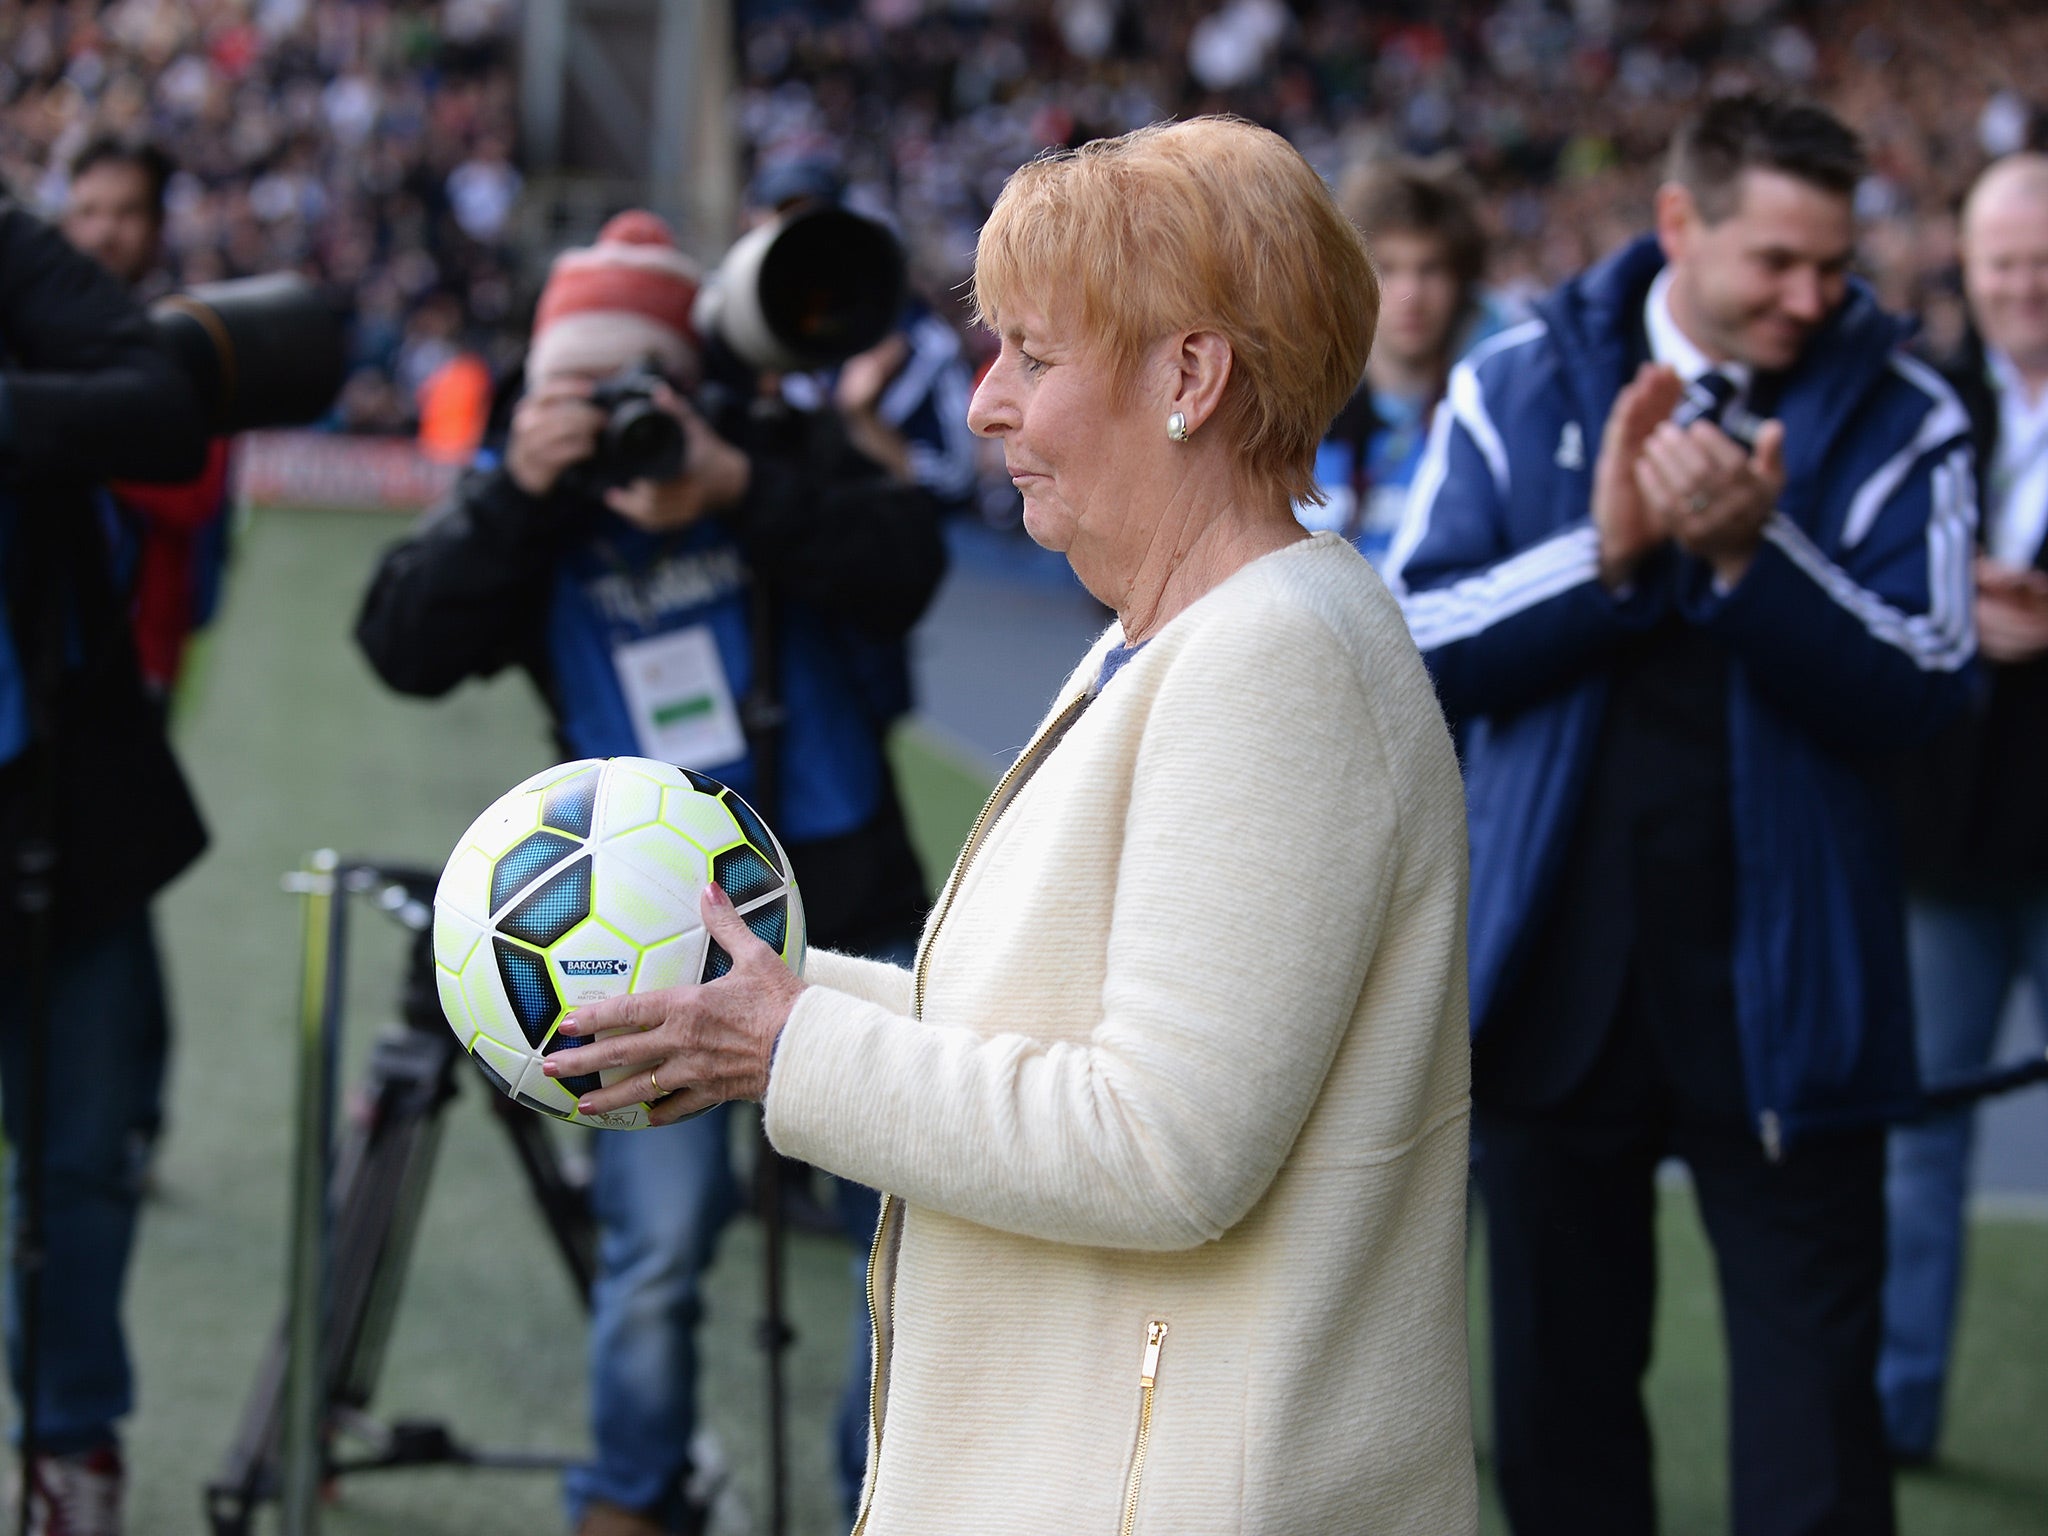 Laraine Astle, Jeff's widow, was present at West Bromwich Albion's 'Jeff Astle Day' in April 2015